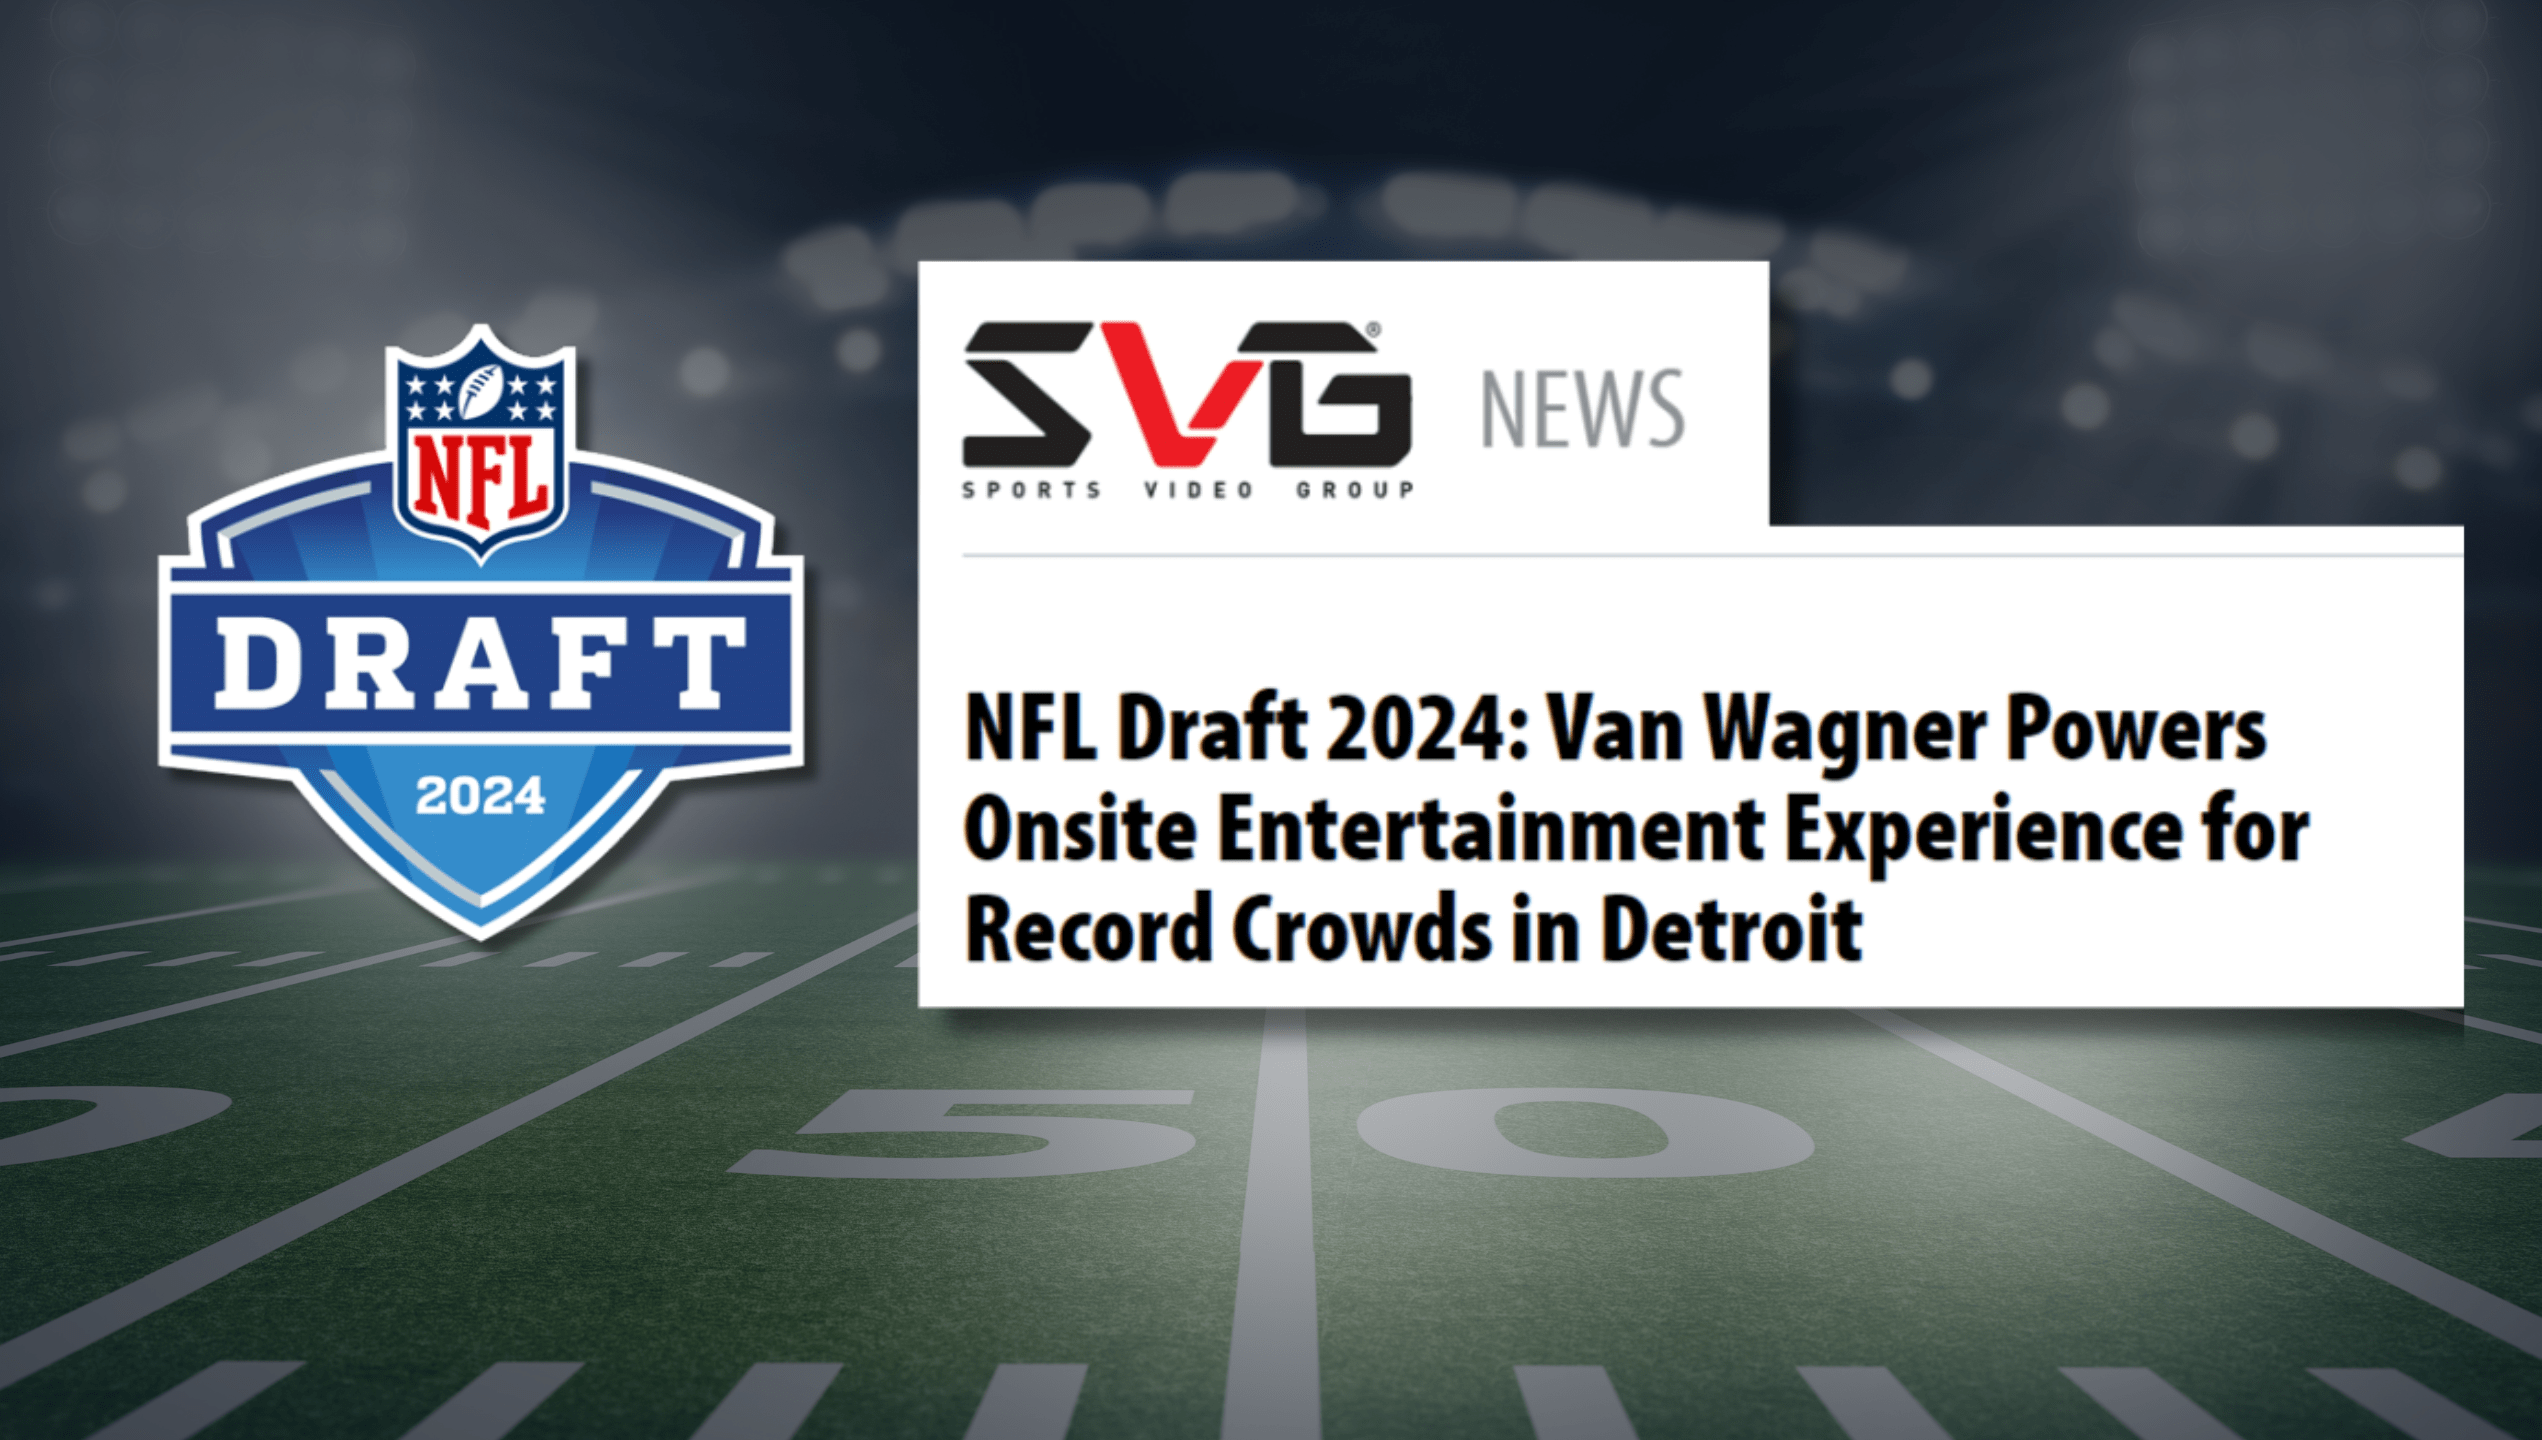 NFL Draft 2024: Van Wagner Powers Onsite Entertainment Experience for Record Crowds in Detroit featured image